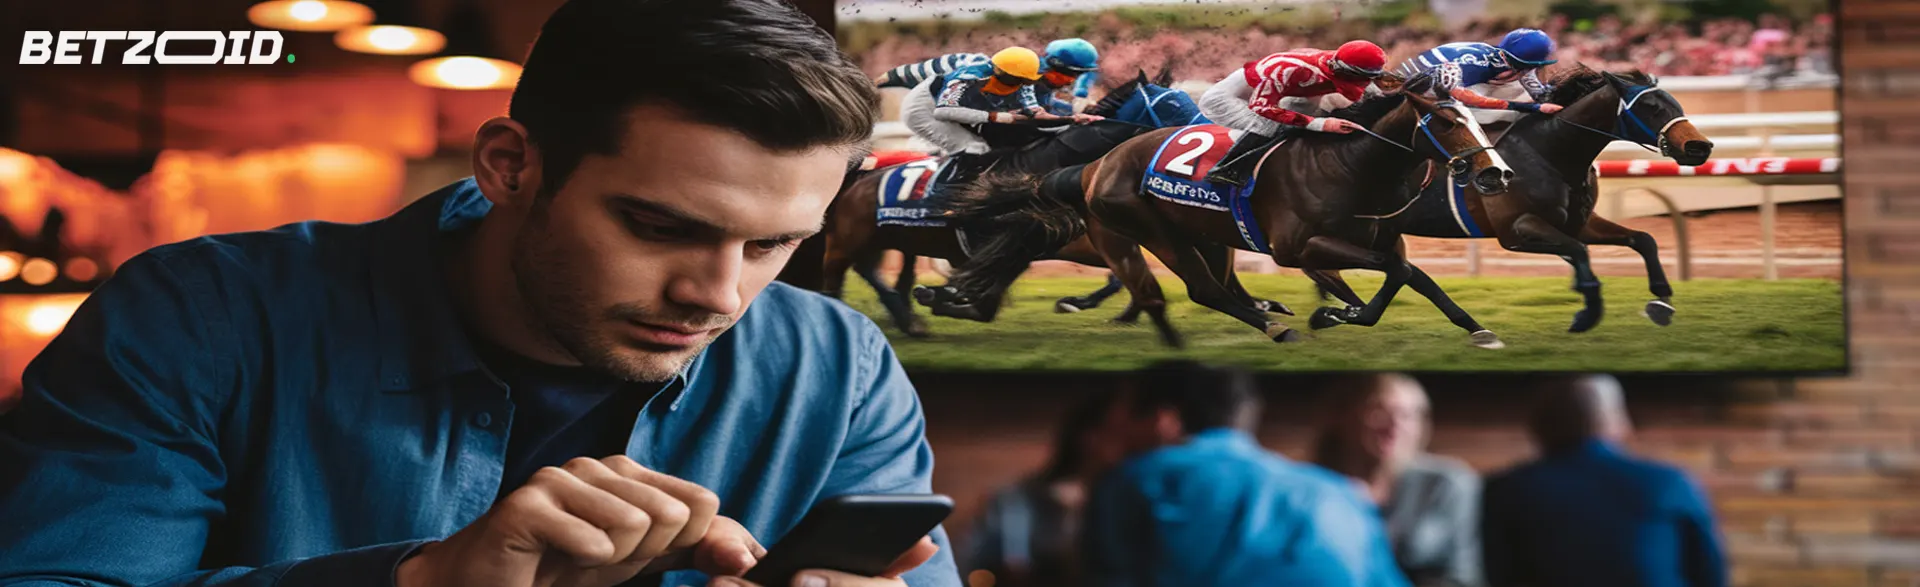 Mobile Betting Apps for Betting on Racing.